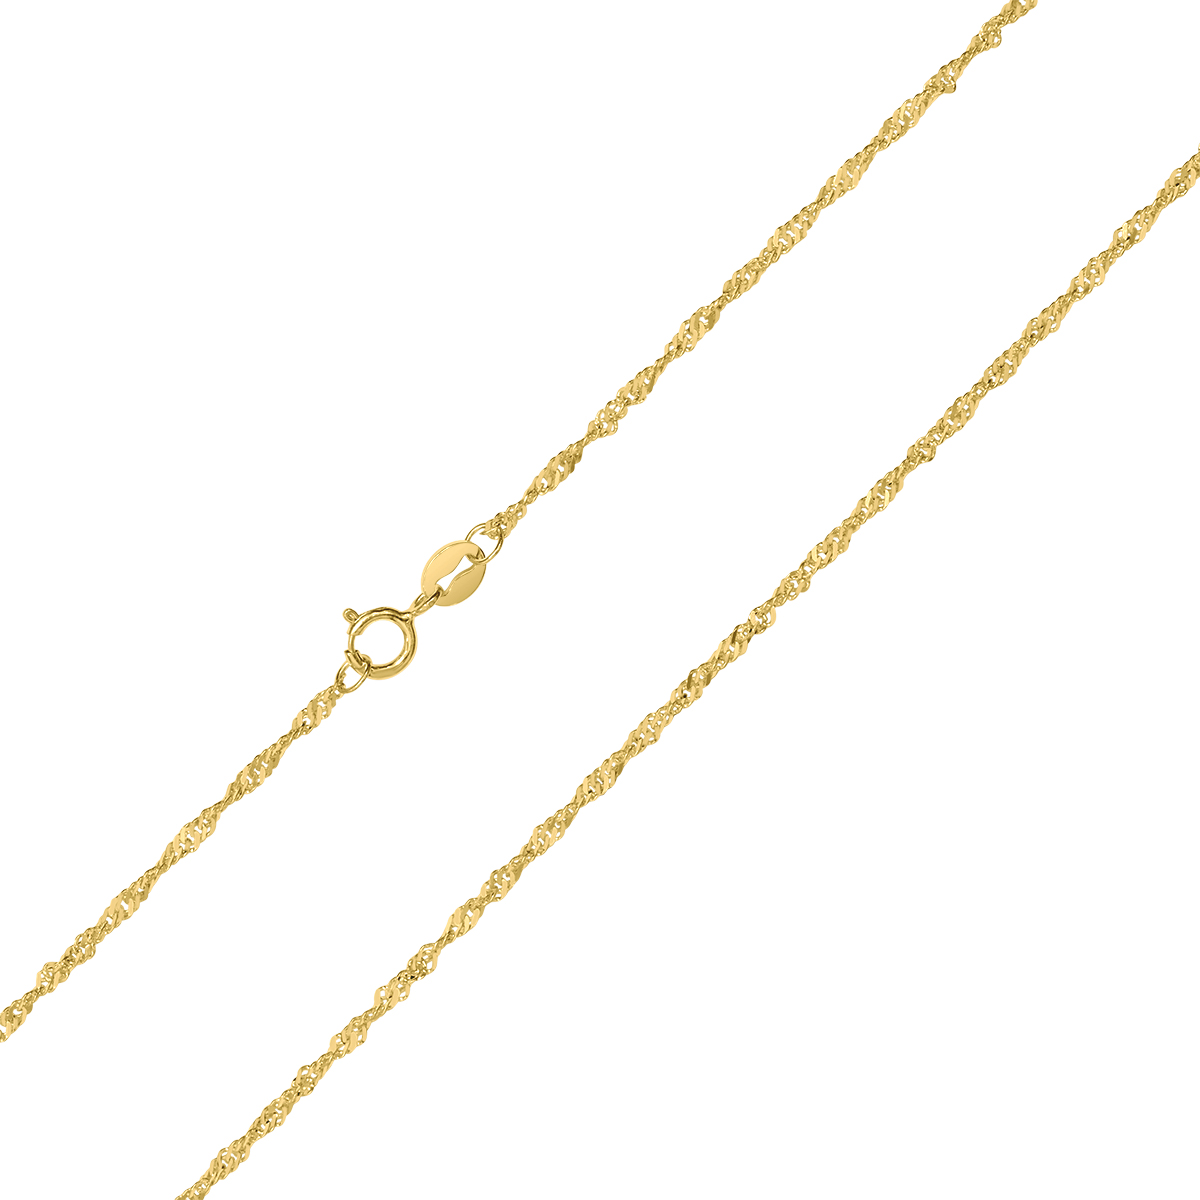 10K Yellow Gold 1.5mm Singapore Chain with Spring Ring Clasp - 18 Inch